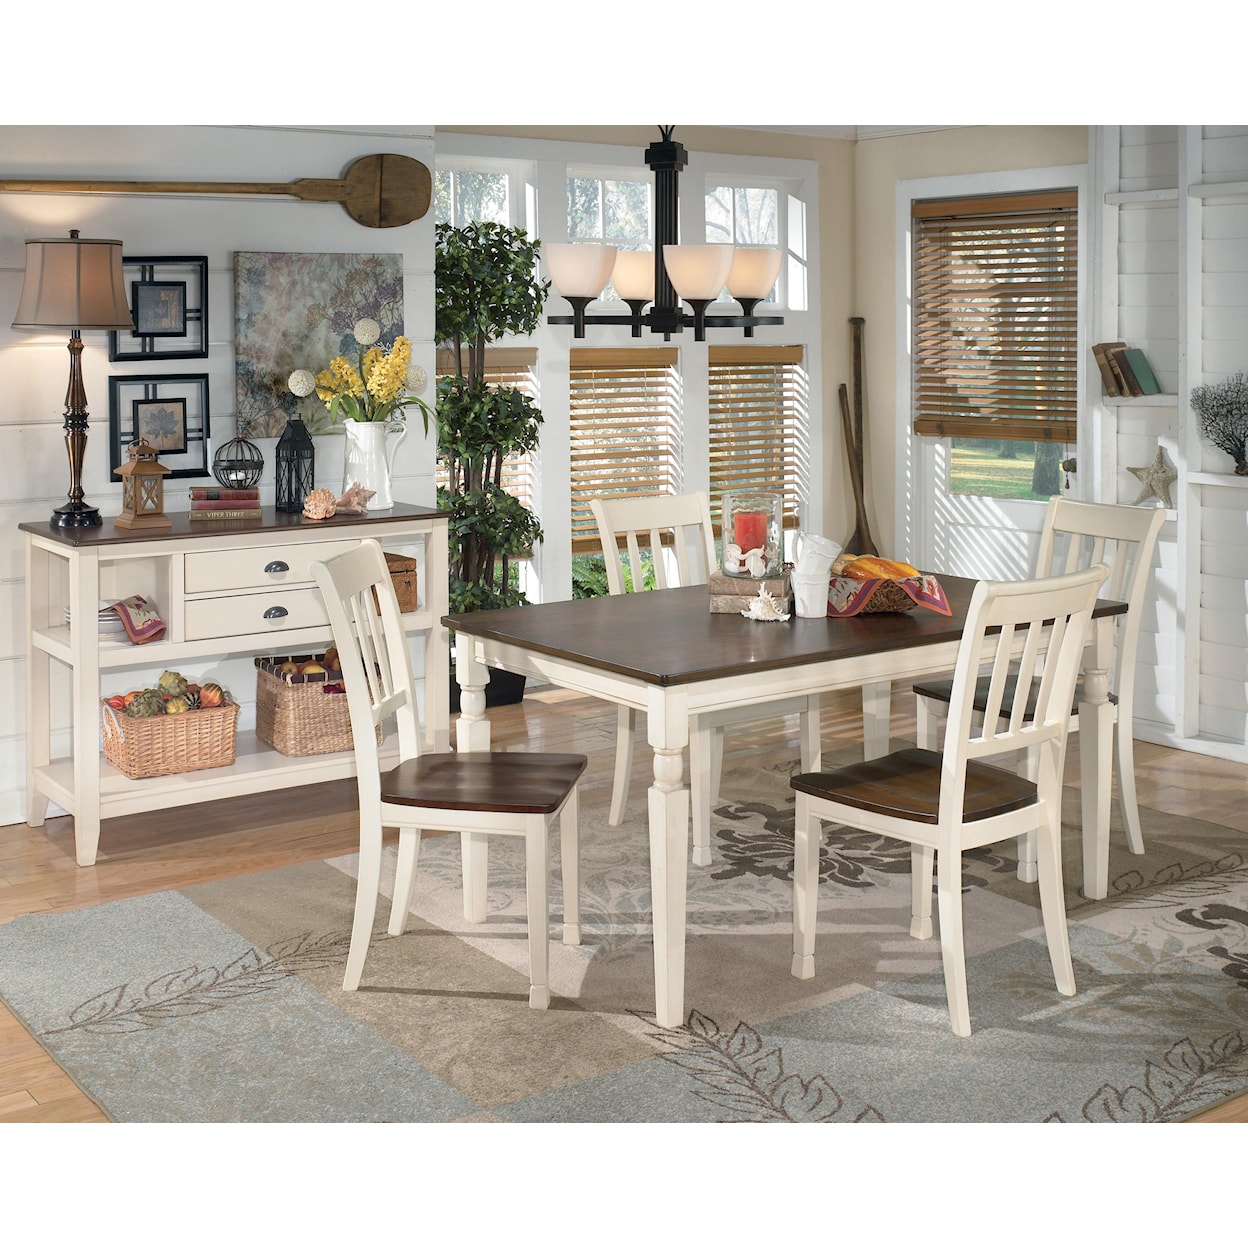 Signature Design by Ashley Whitesburg Casual Dining Room Group